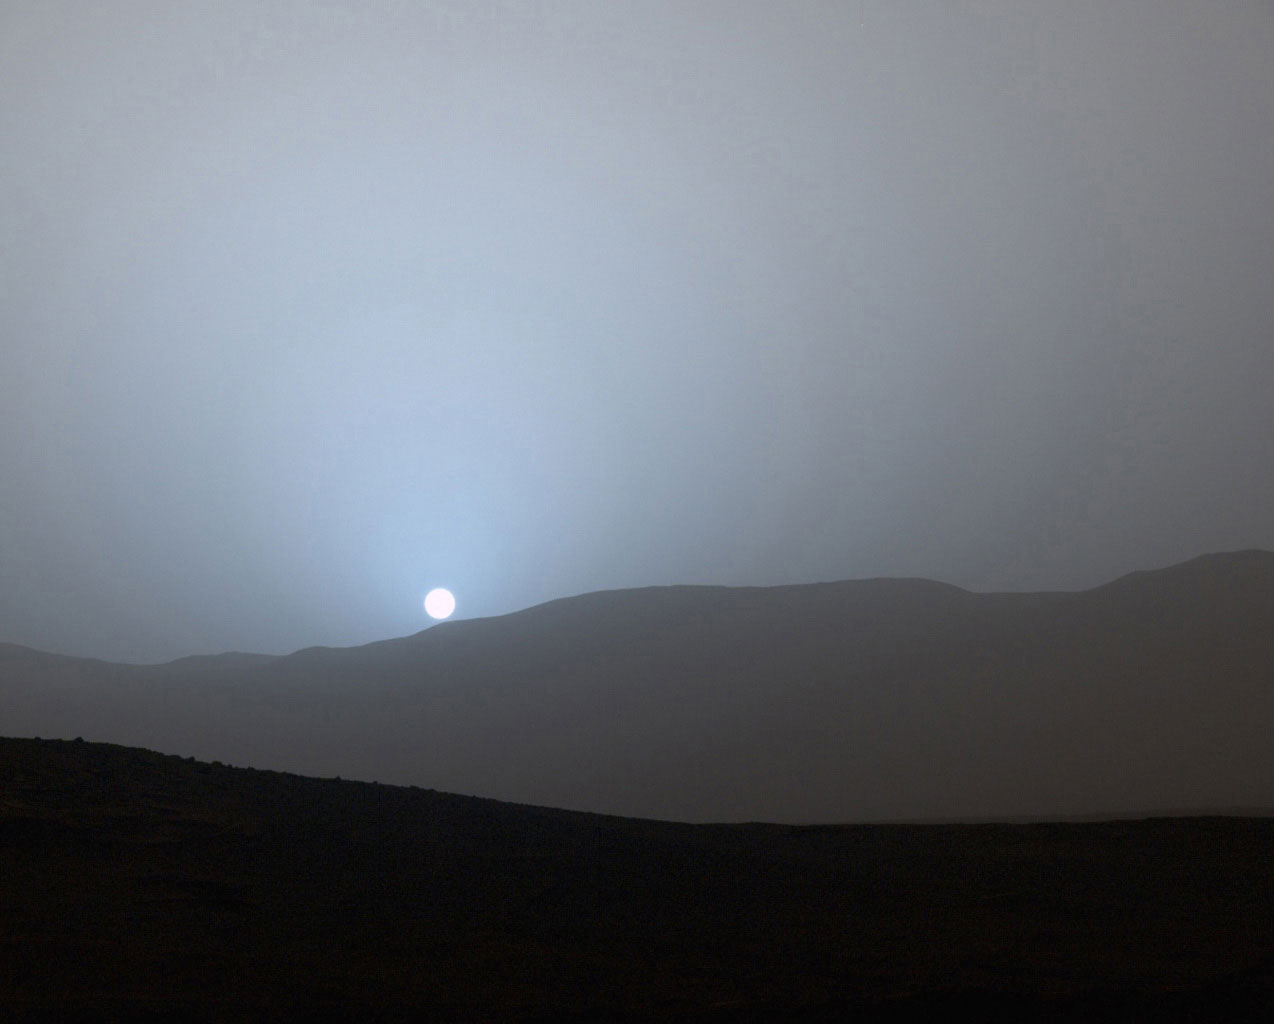 NASA's Curiosity Mars rover recorded this view of the sun setting at the close of the mission's 956th Martian day, or sol (April 15, 2015), from the rover's location in Gale Crater.This was the first sunset observed in color by Curiosity. The image comes from the left-eye camera of the rover's Mast Camera (Mastcam). The color has been calibrated and white-balanced to remove camera artifacts. Mastcam sees color very similarly to what human eyes see, although it is actually a little less sensitive to blue than people are.Dust in the Martian atmosphere has fine particles that permit blue light to penetrate the atmosphere more efficiently than longer-wavelength colors. That causes the blue colors in the mixed light coming from the sun to stay closer to sun's part of the sky, compared to the wider scattering of yellow and red colors. The effect is most pronounced near sunset, when light from the sun passes through a longer path in the atmosphere than it does at mid-day.Malin Space Science Systems, San Diego, built and operates the rover's Mastcam. NASA's Jet Propulsion Laboratory, a division of the California Institute of Technology, Pasadena, manages the Mars Science Laboratory Project for NASA's Science Mission Directorate, Washington. JPL designed and built the project's Curiosity rover.